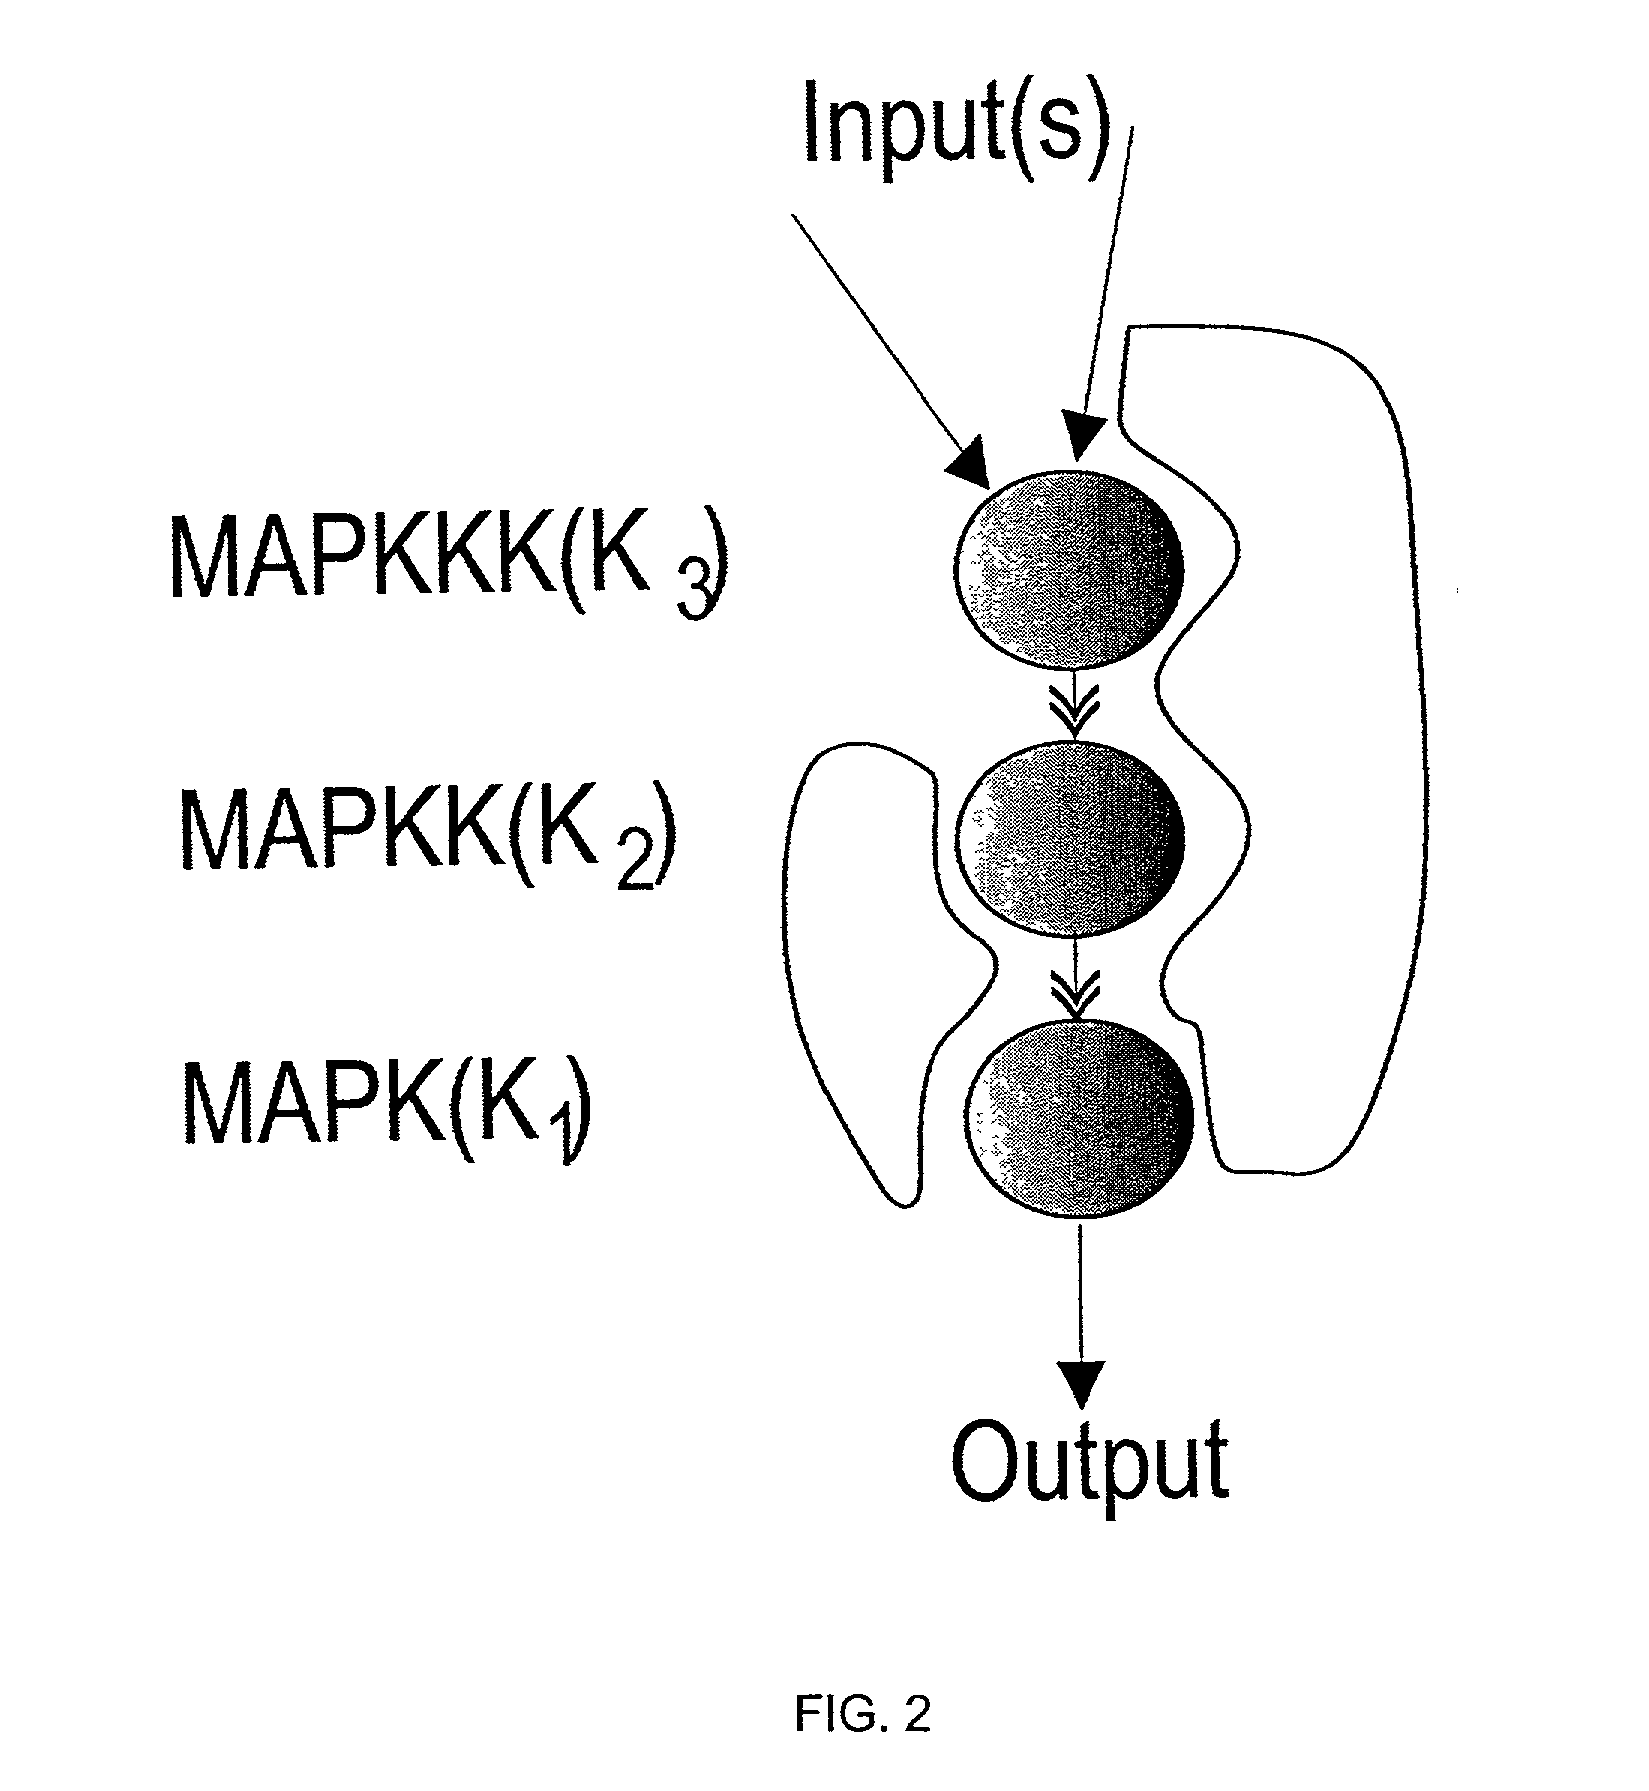 Automated methods for simulating a biological network